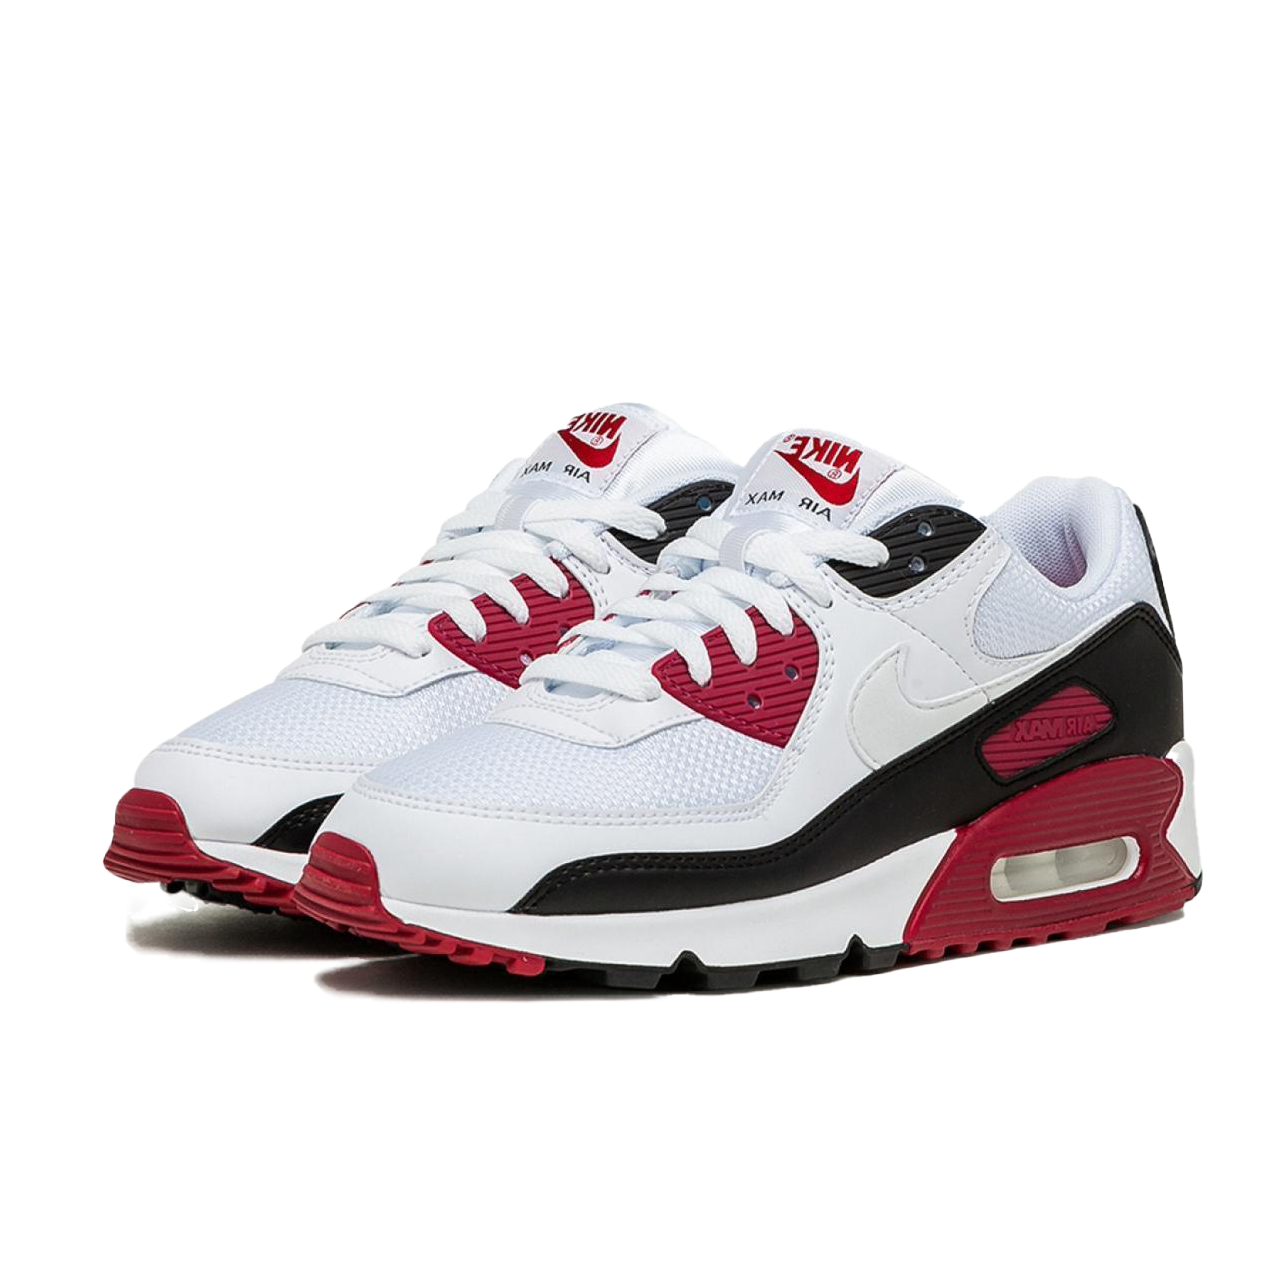 https://admin.thegioigiay.com/upload/product/2022/11/giay-the-thao-nike-air-max-2-light-habanero-red-size-40-6371cab6a2ddd-14112022115726.png